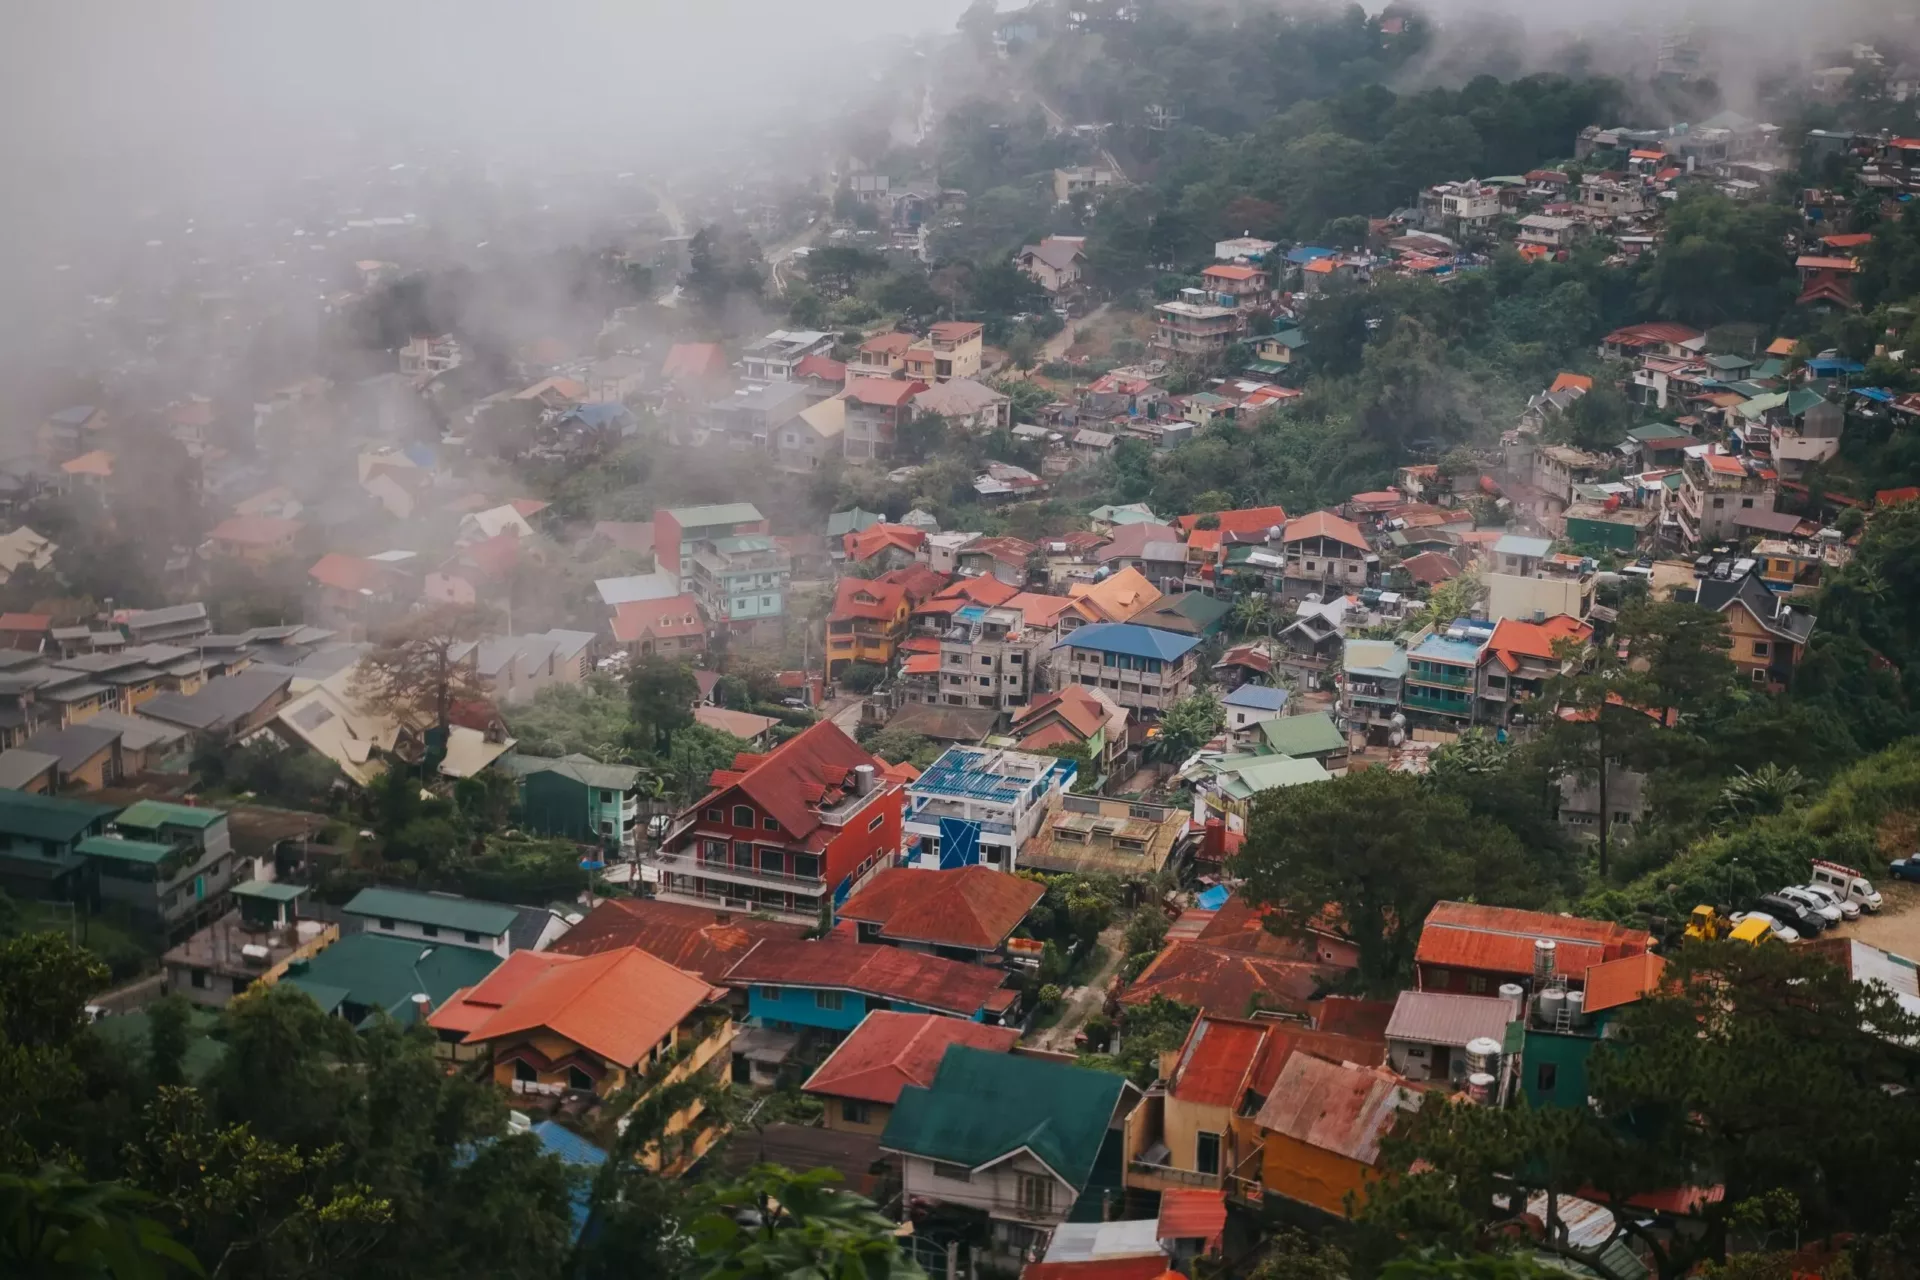 view of the baguio city